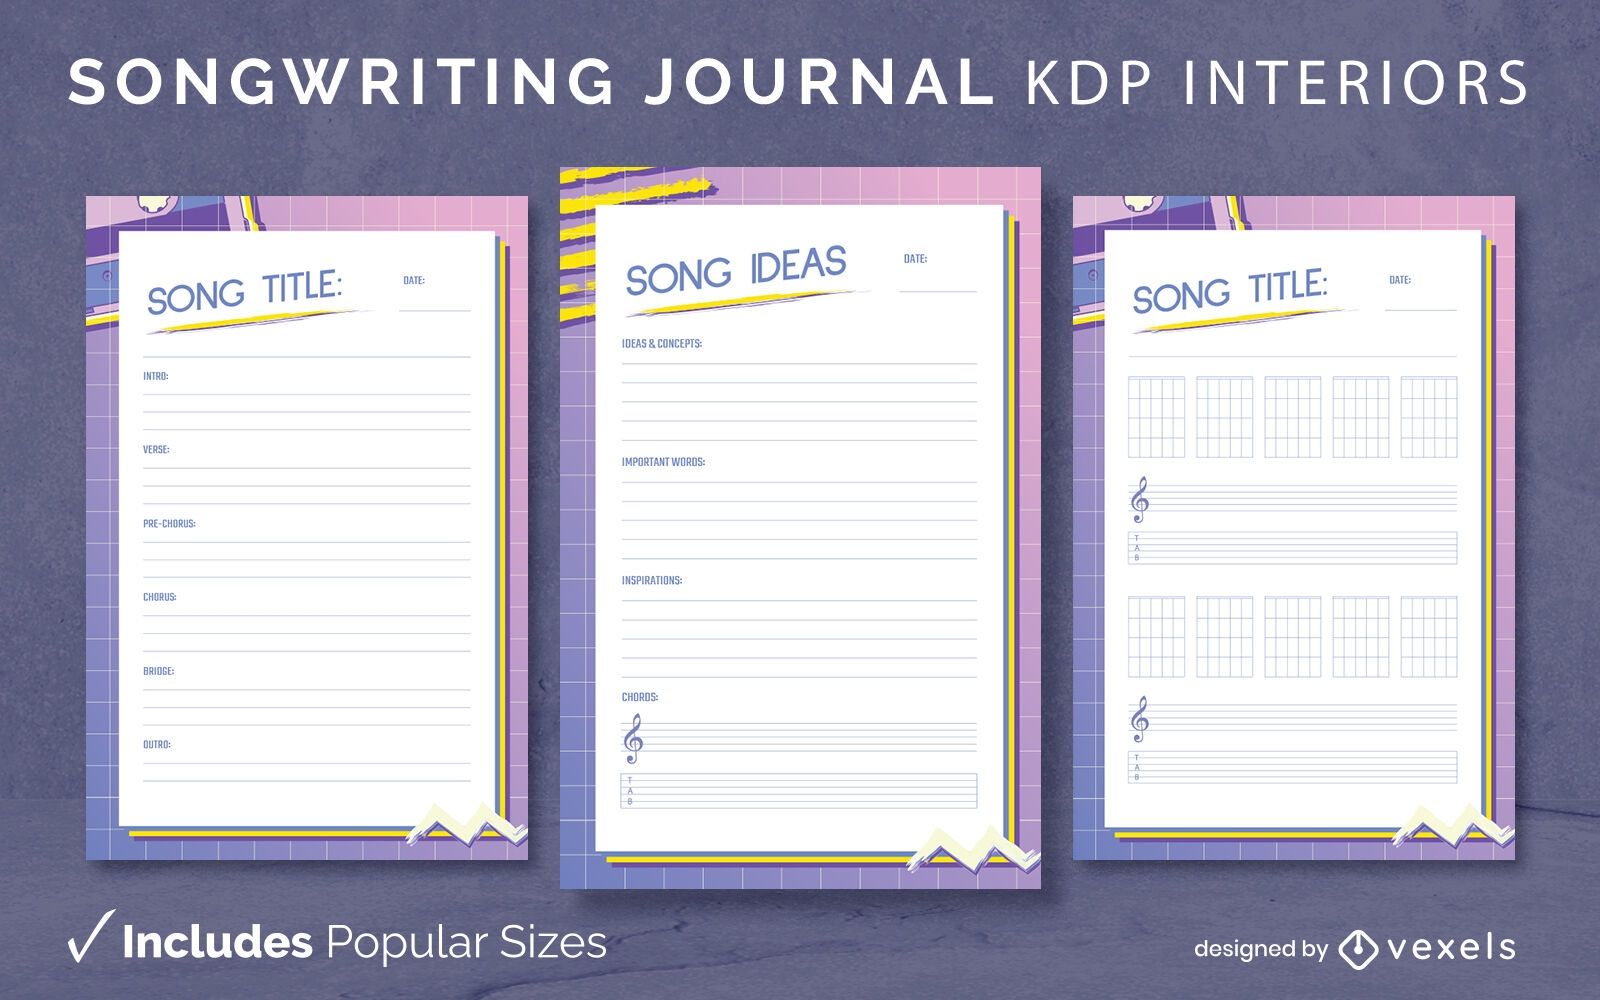 Songwriting journal design template KDP